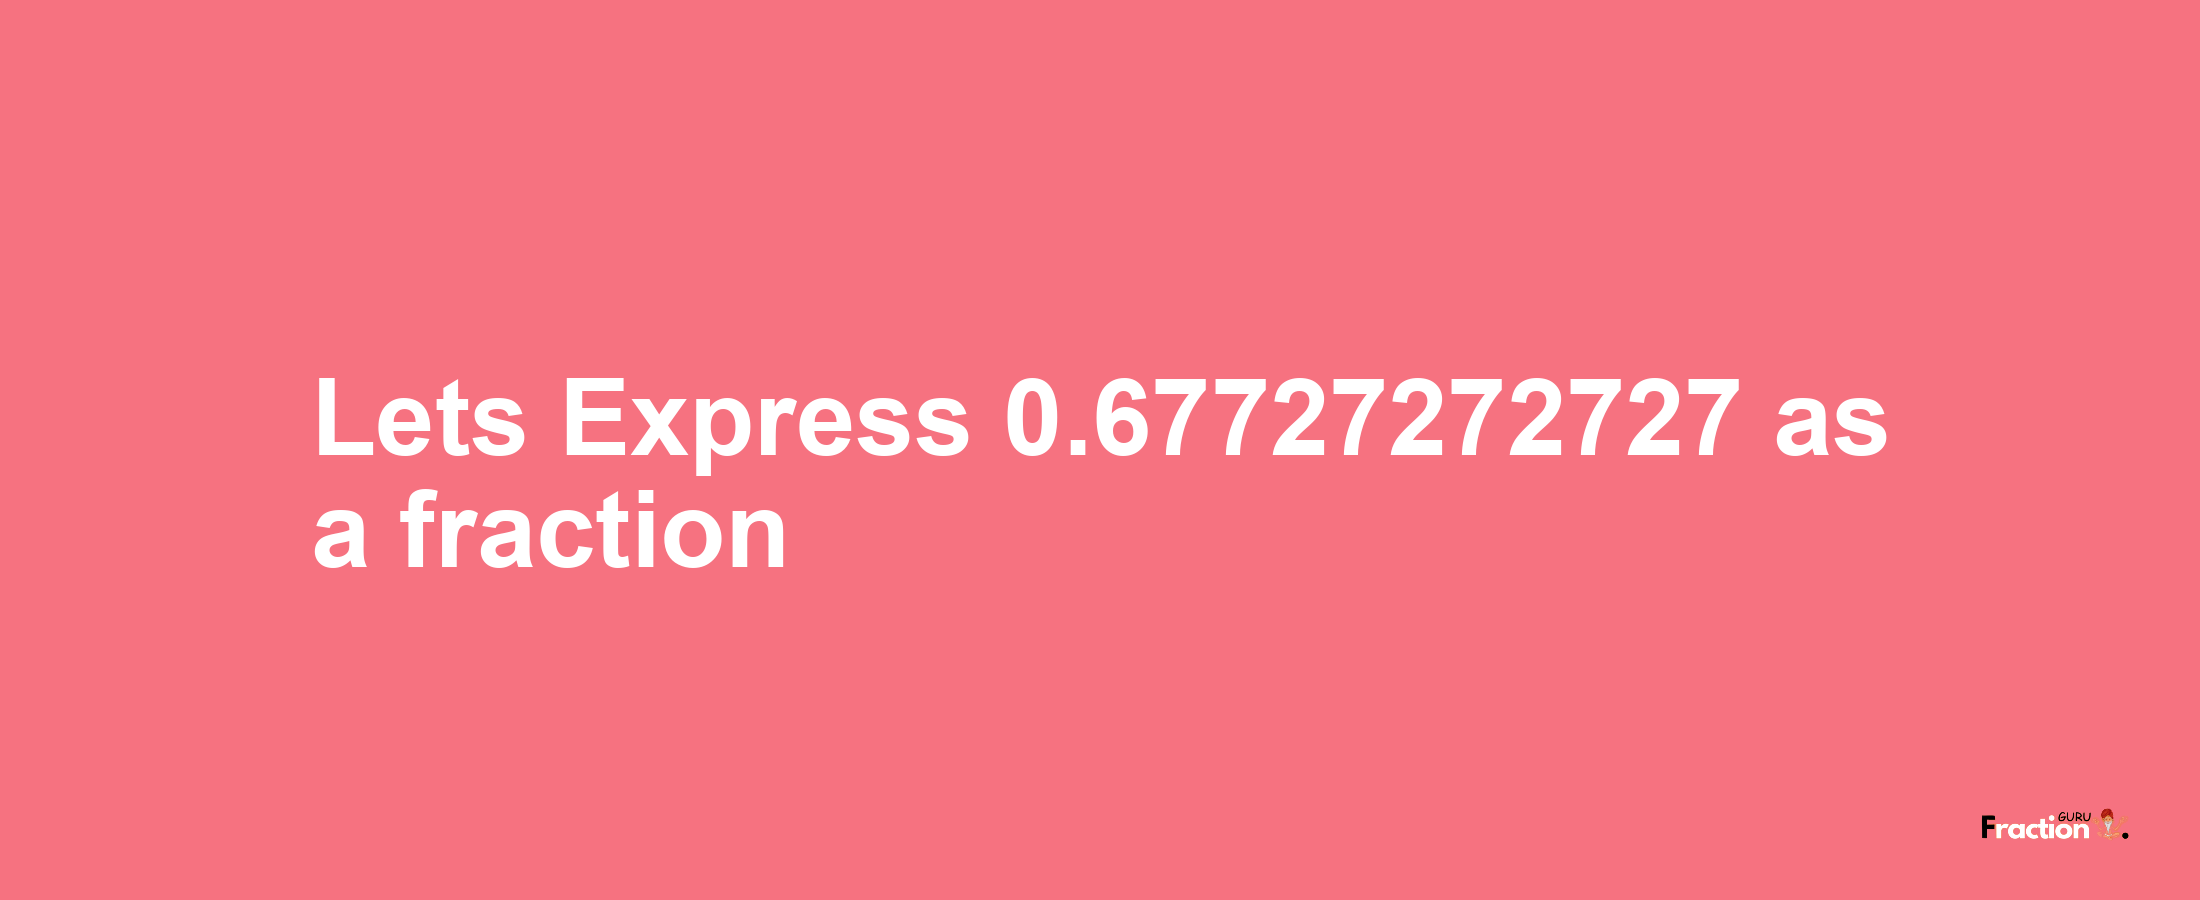 Lets Express 0.67727272727 as afraction